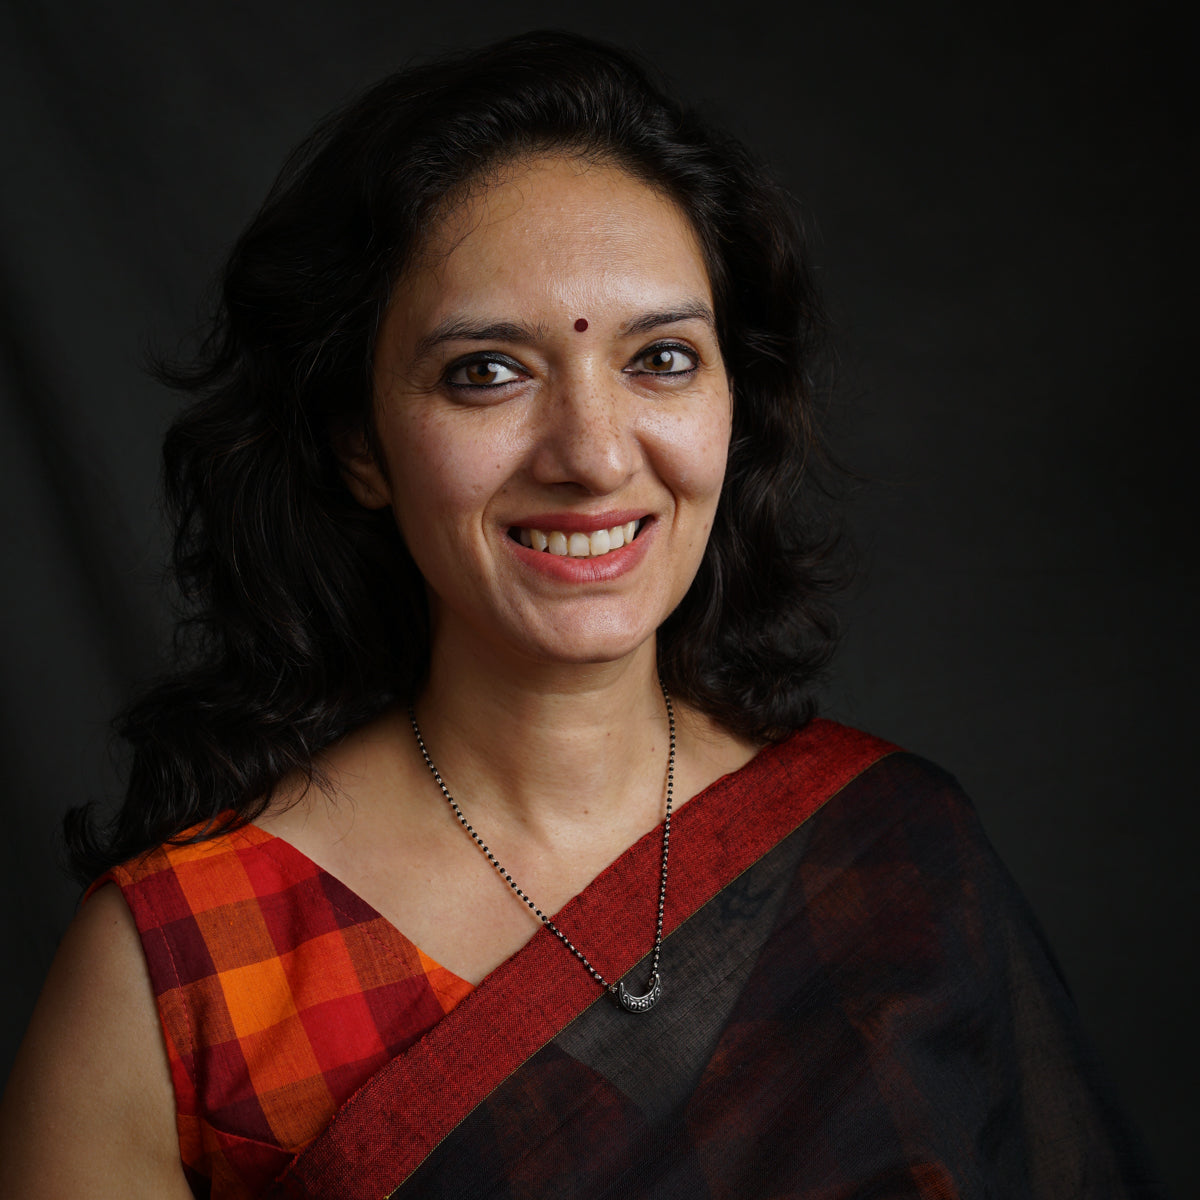 a woman in a red and black sari smiling